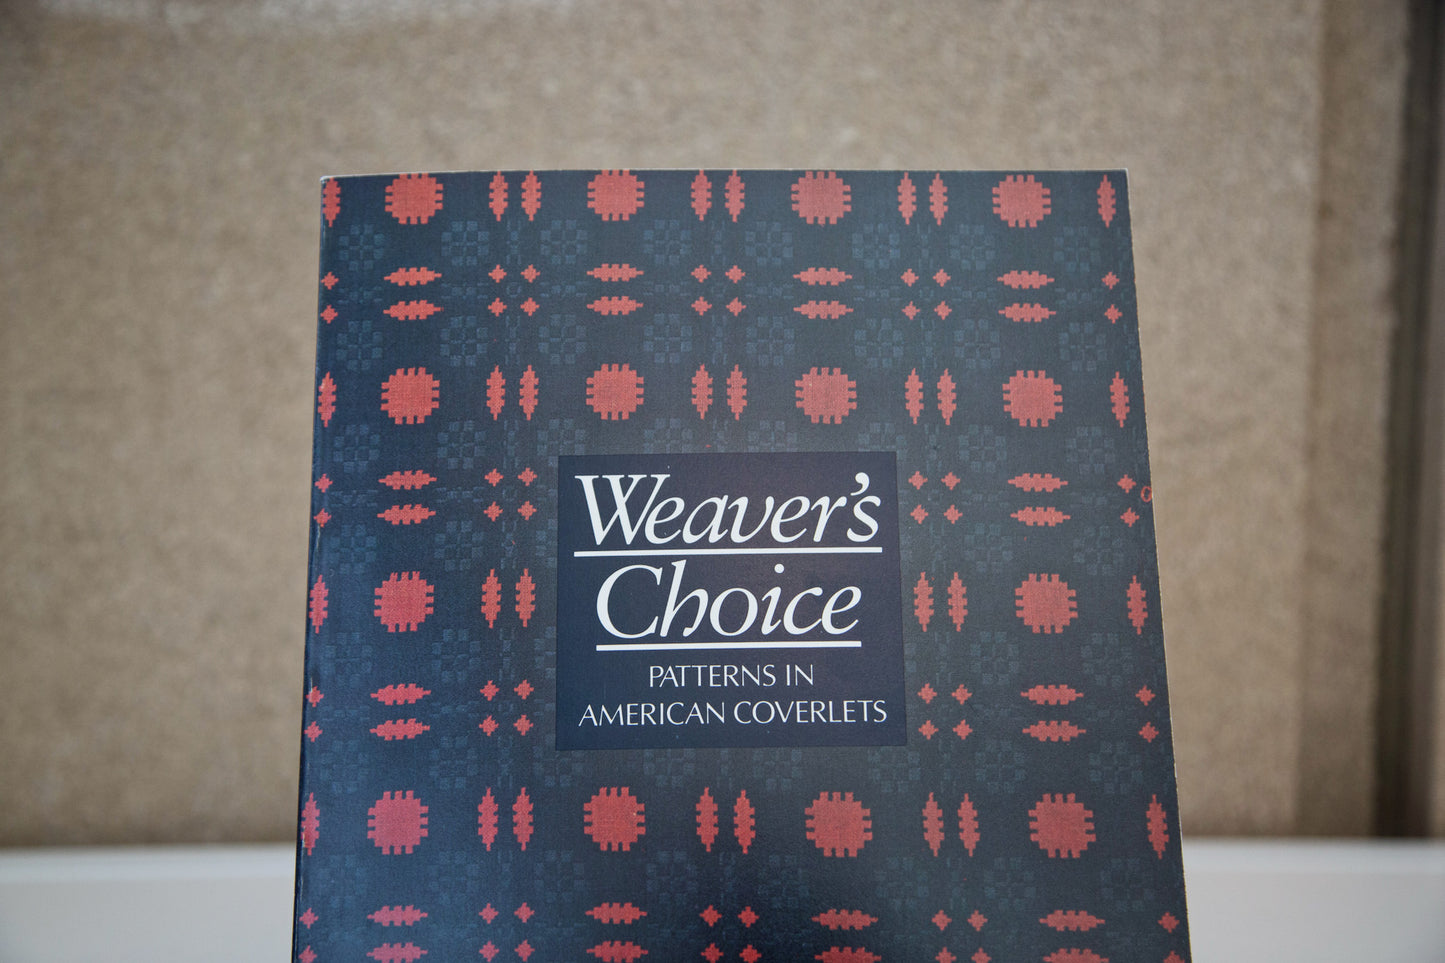 Closer image of cover of “Weaver’s Choice: Patterns in American Coverlets”.